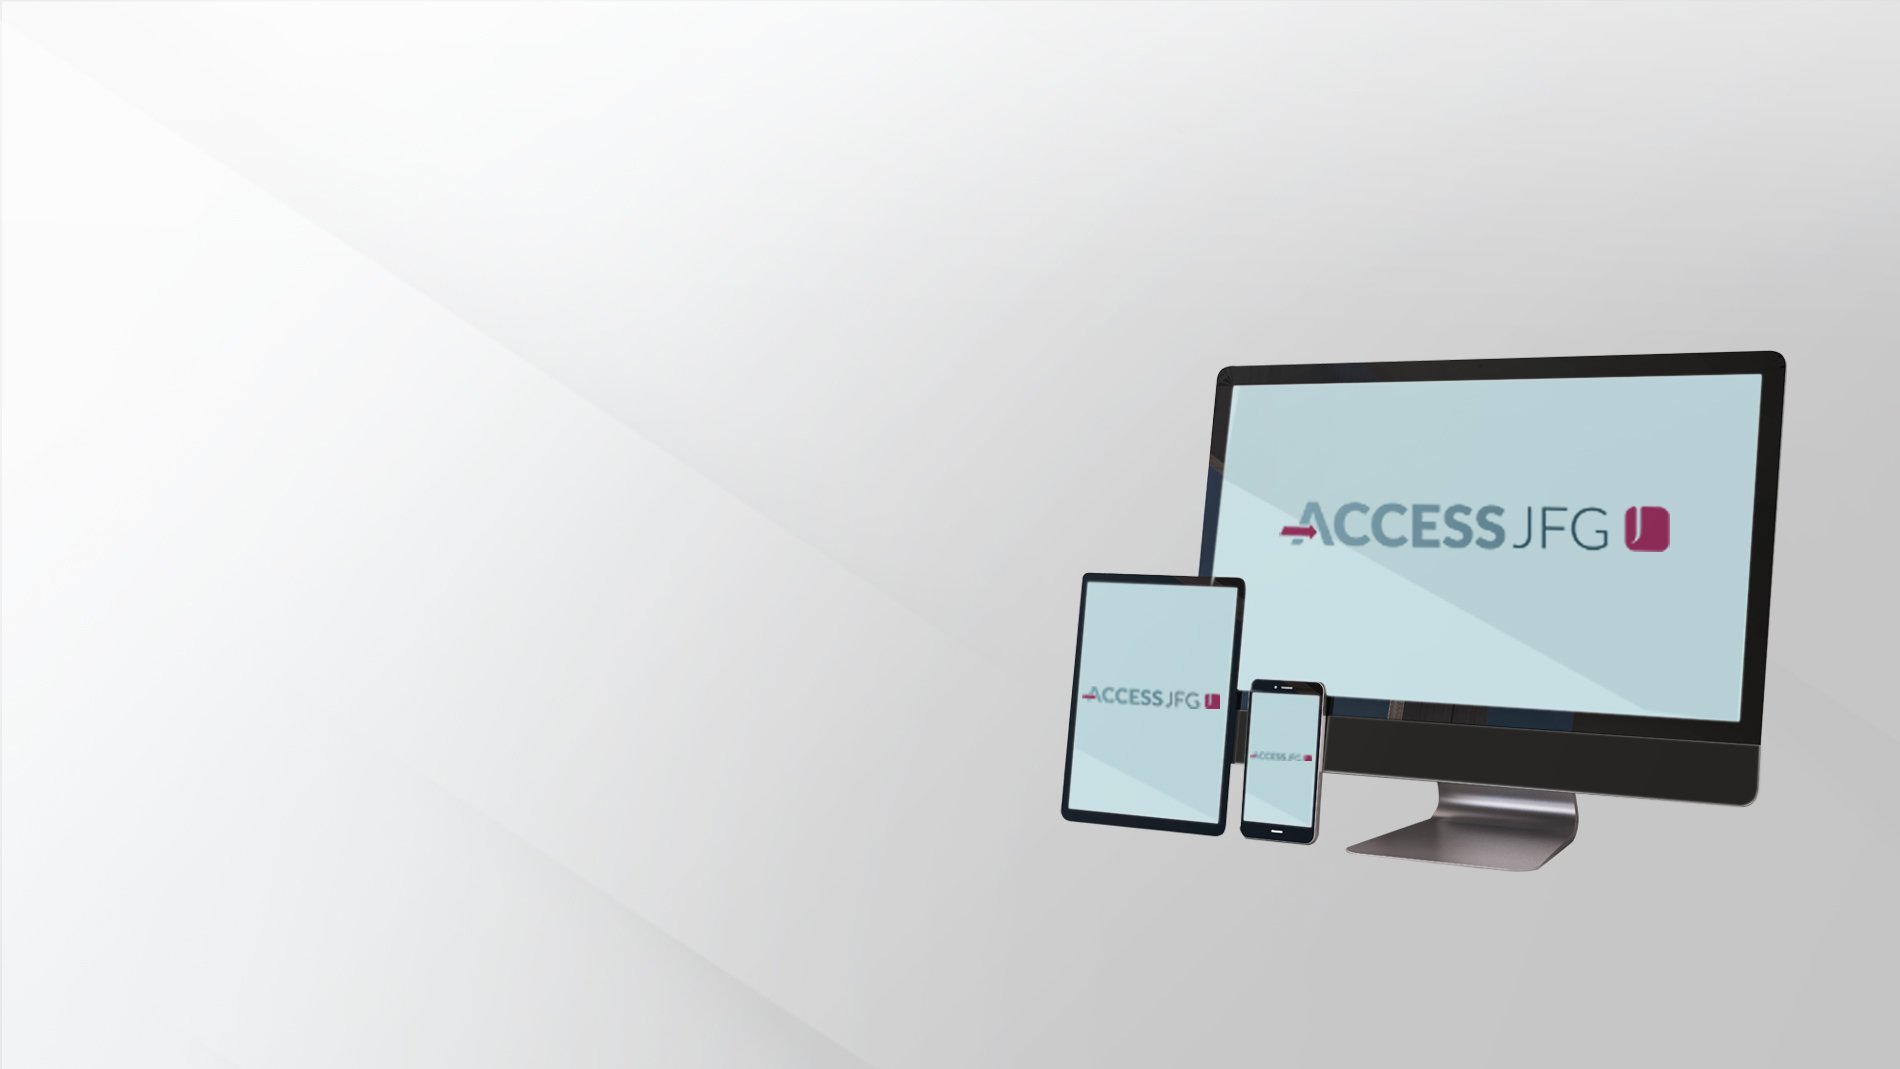 AccessJFG on multiple devices